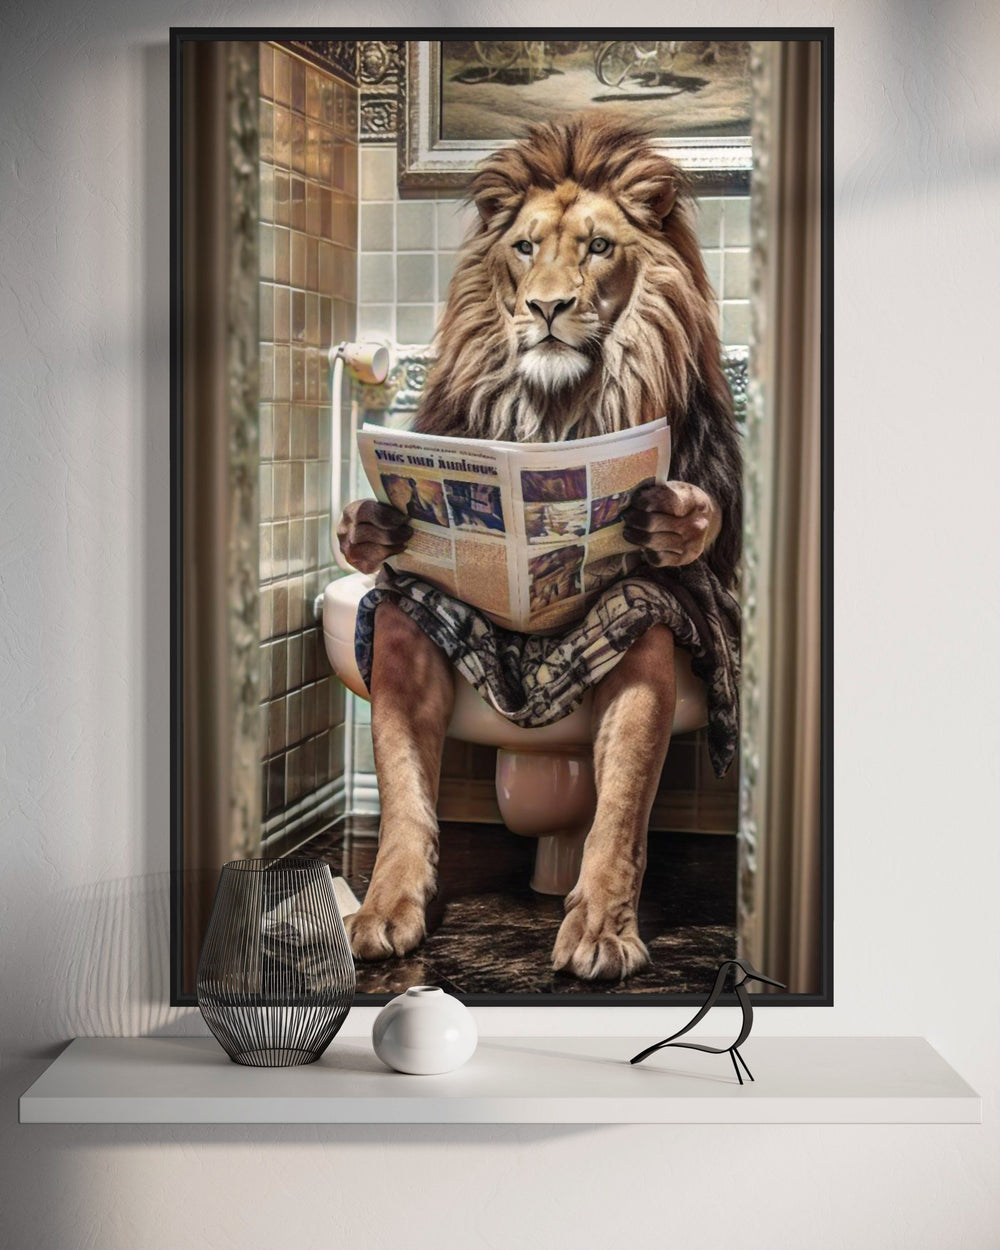 Lion on Toilet Reading Newspaper Framed Canvas Wall Art